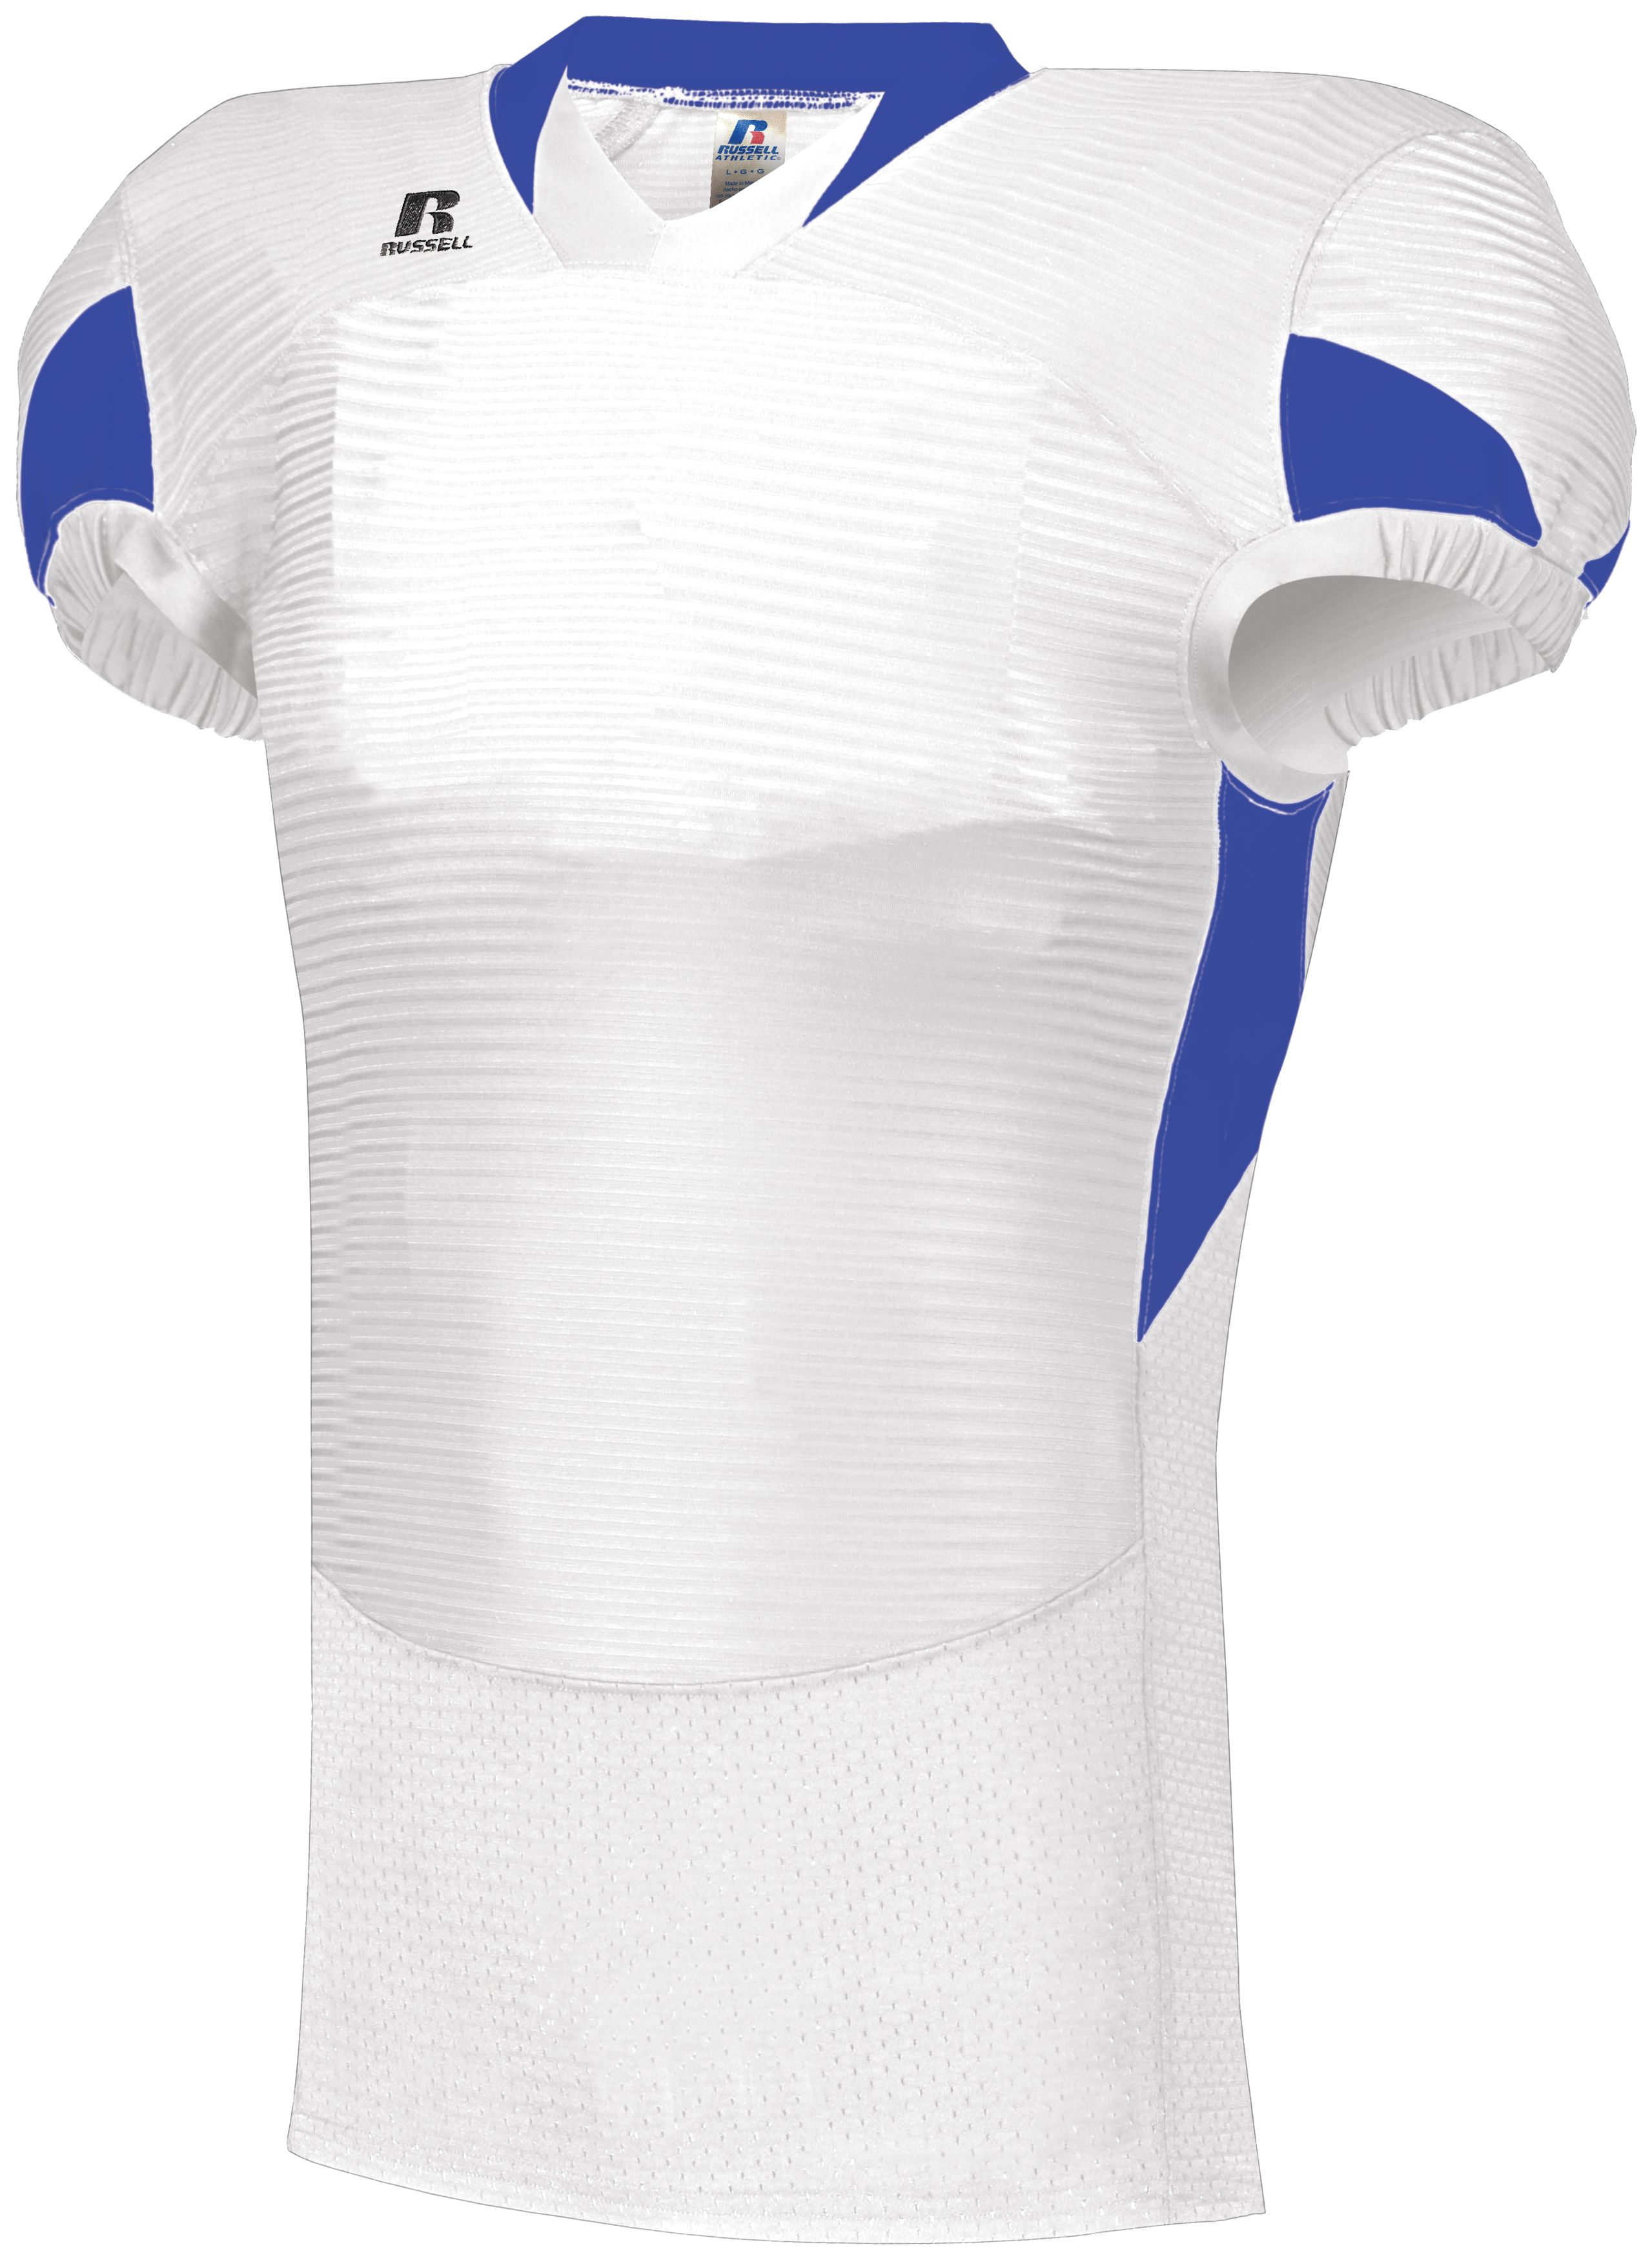 Russell Athletic S81XCM - Waist Length Football Jersey